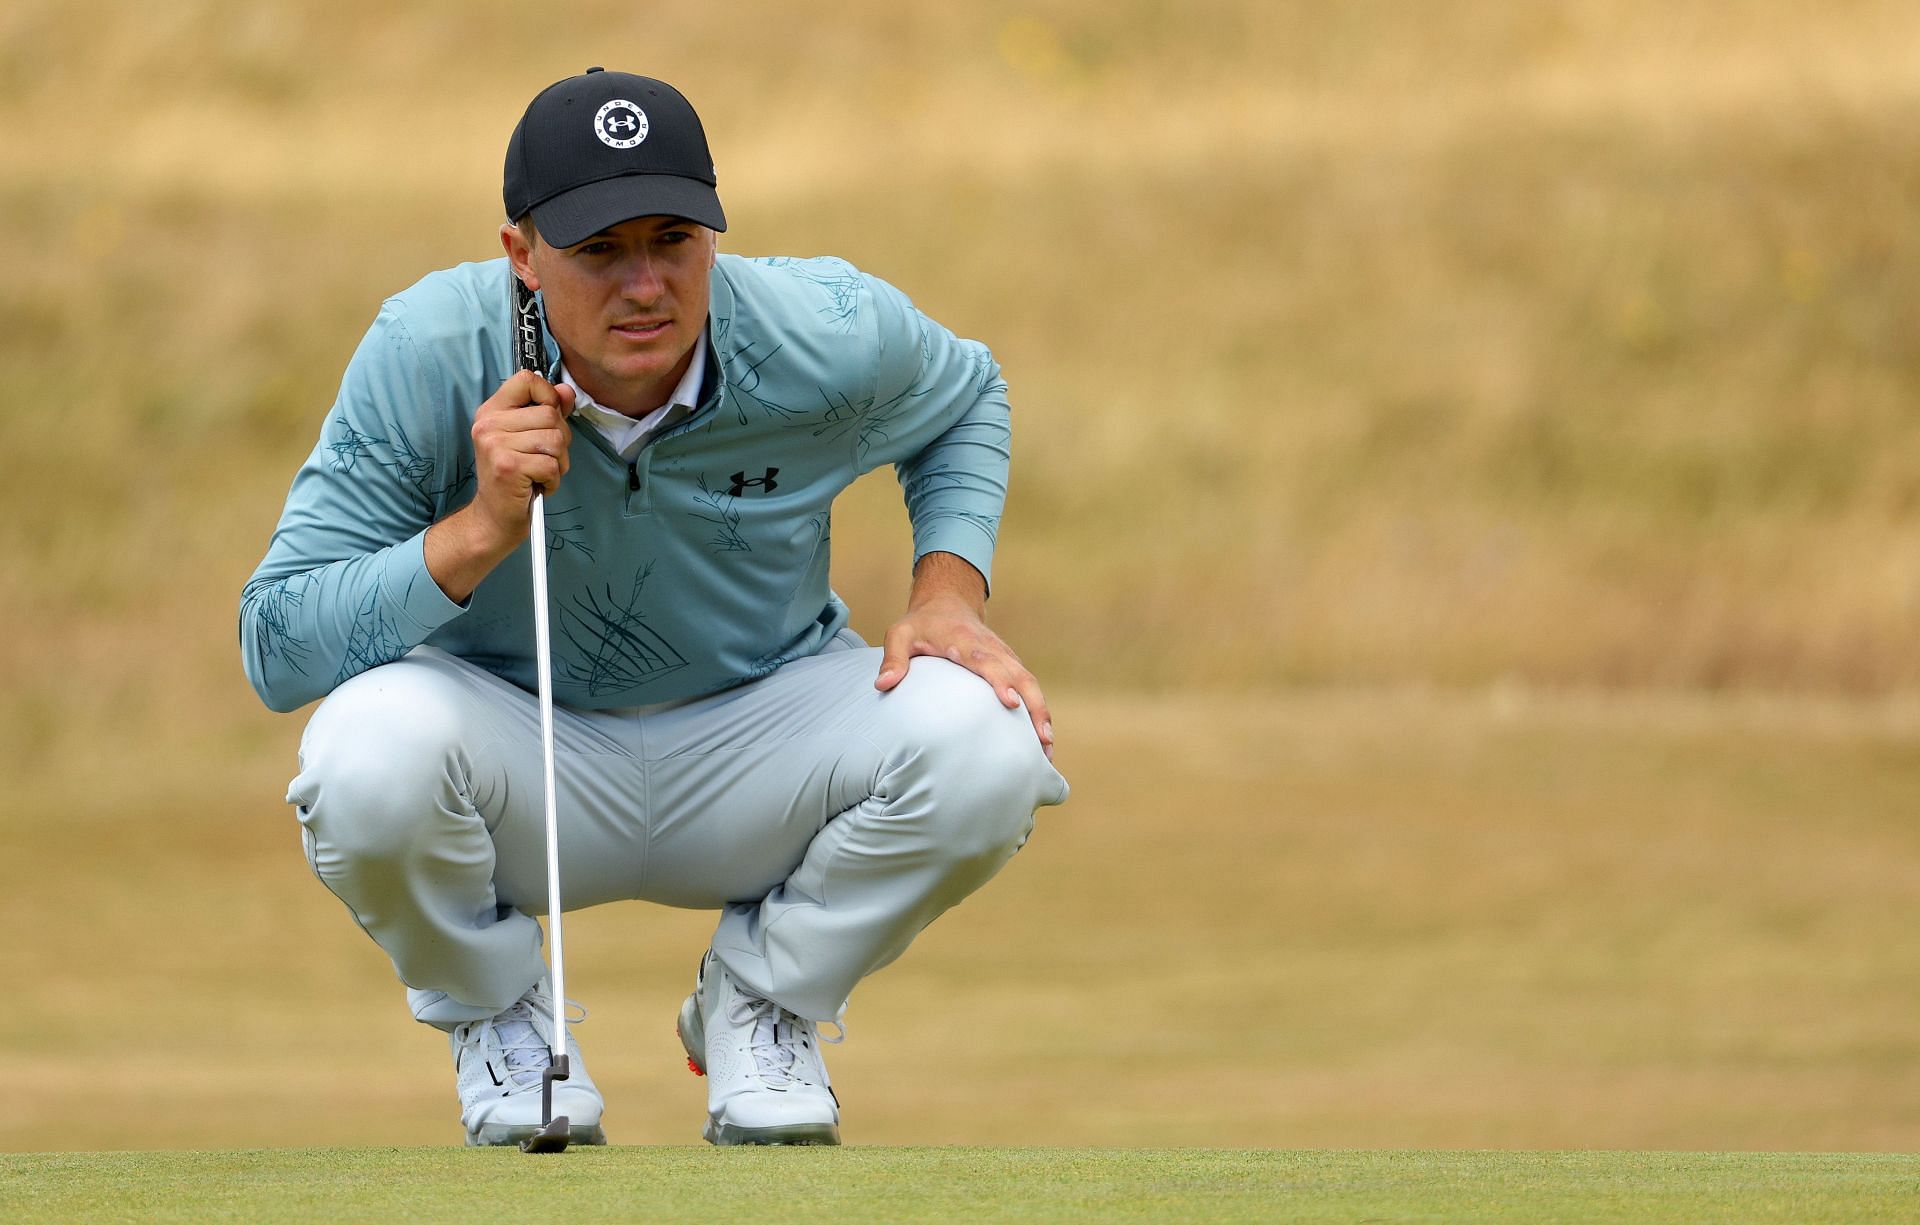 Jordan Spieth on Day 2 of the 150th Open (Image via Getty)